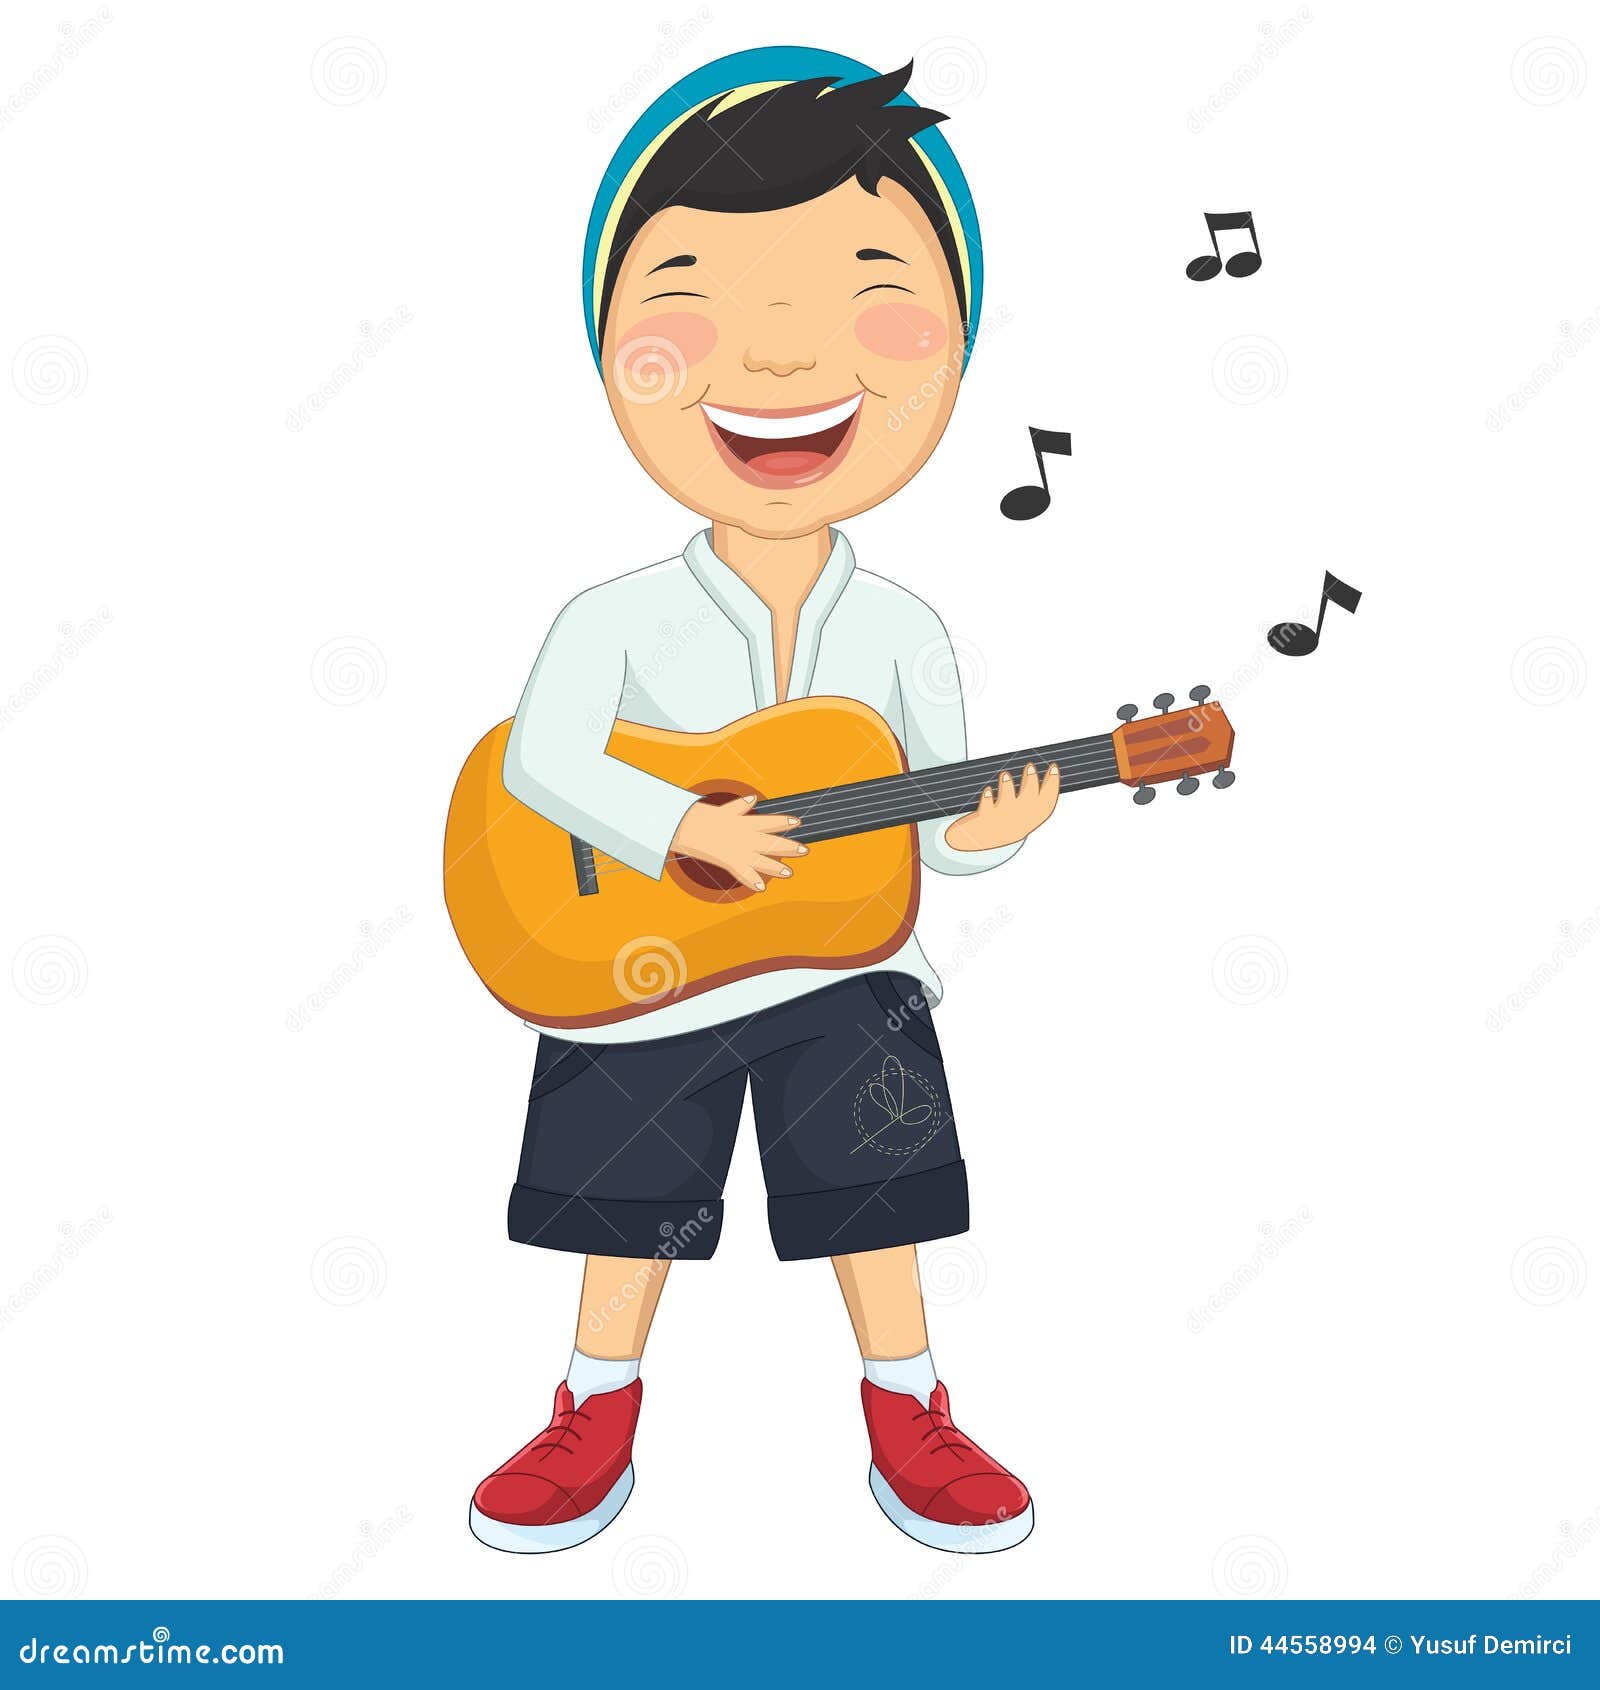 girl playing guitar clipart - photo #20